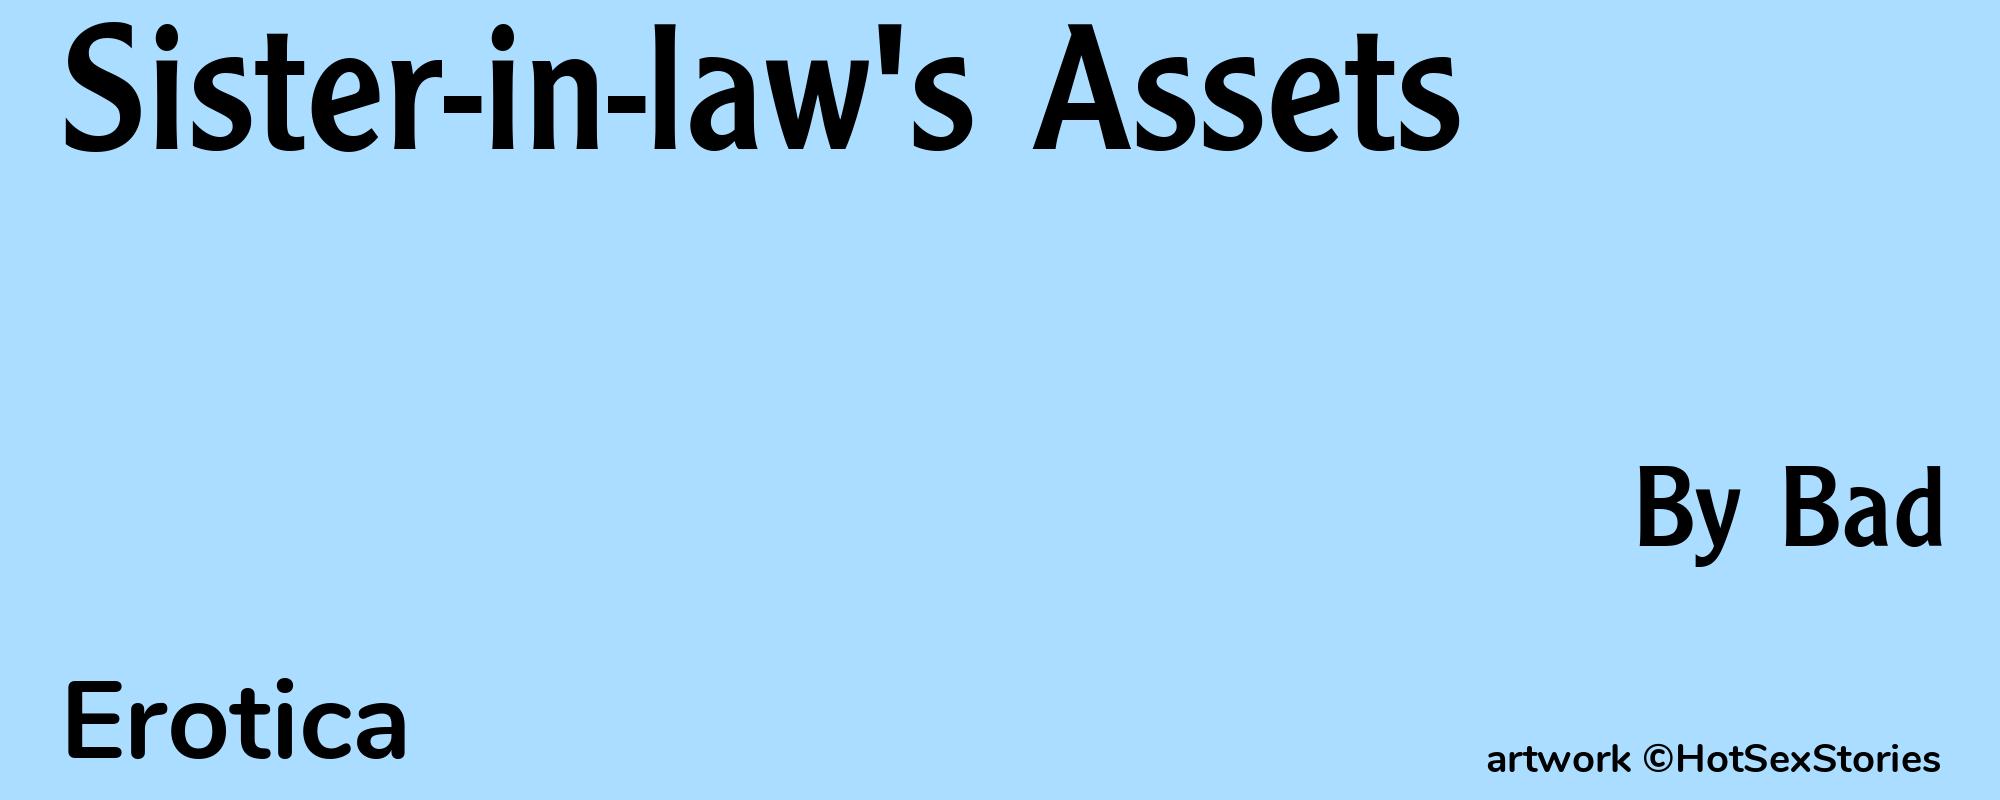 Sister-in-law's Assets - Cover